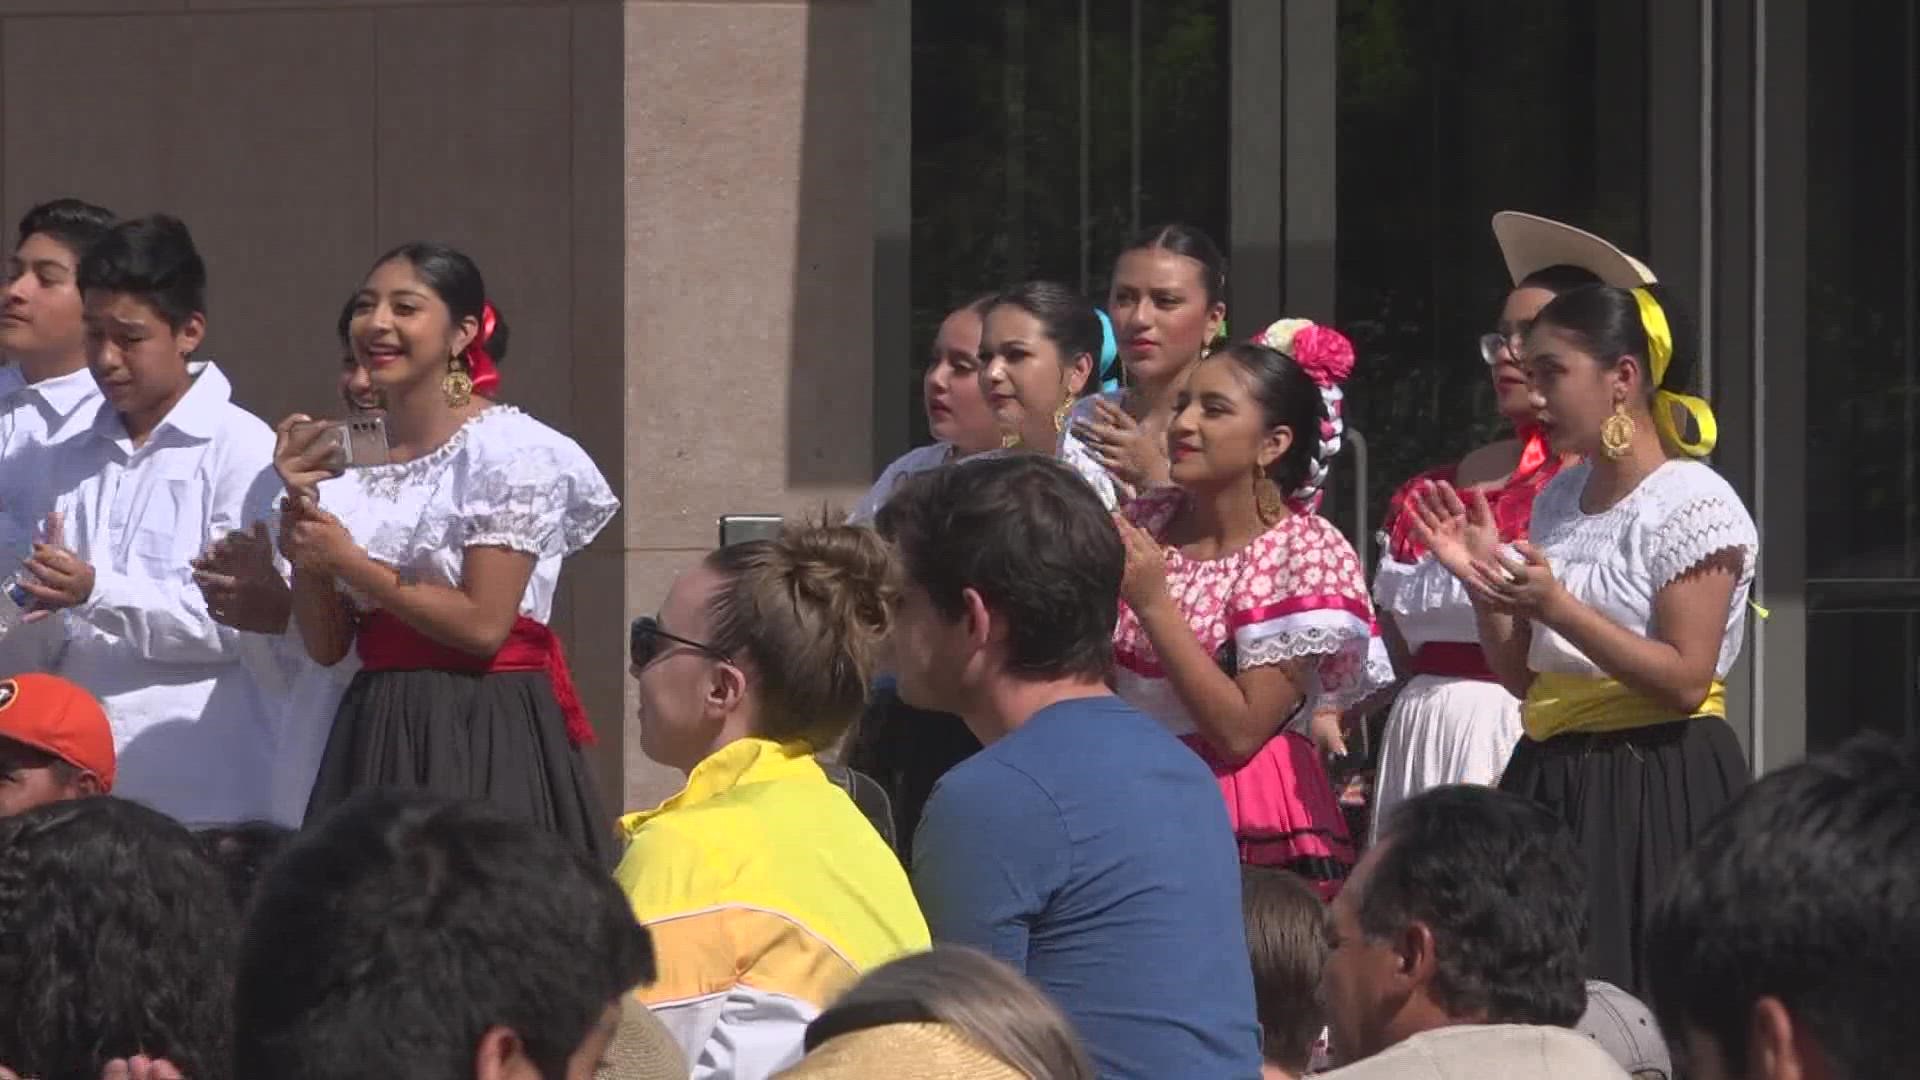 Latinos en Spokane usually hosts El Mercadito in Cannon Park on the last Saturday of the month, but the event made a special appearance at the MAC this Saturday.